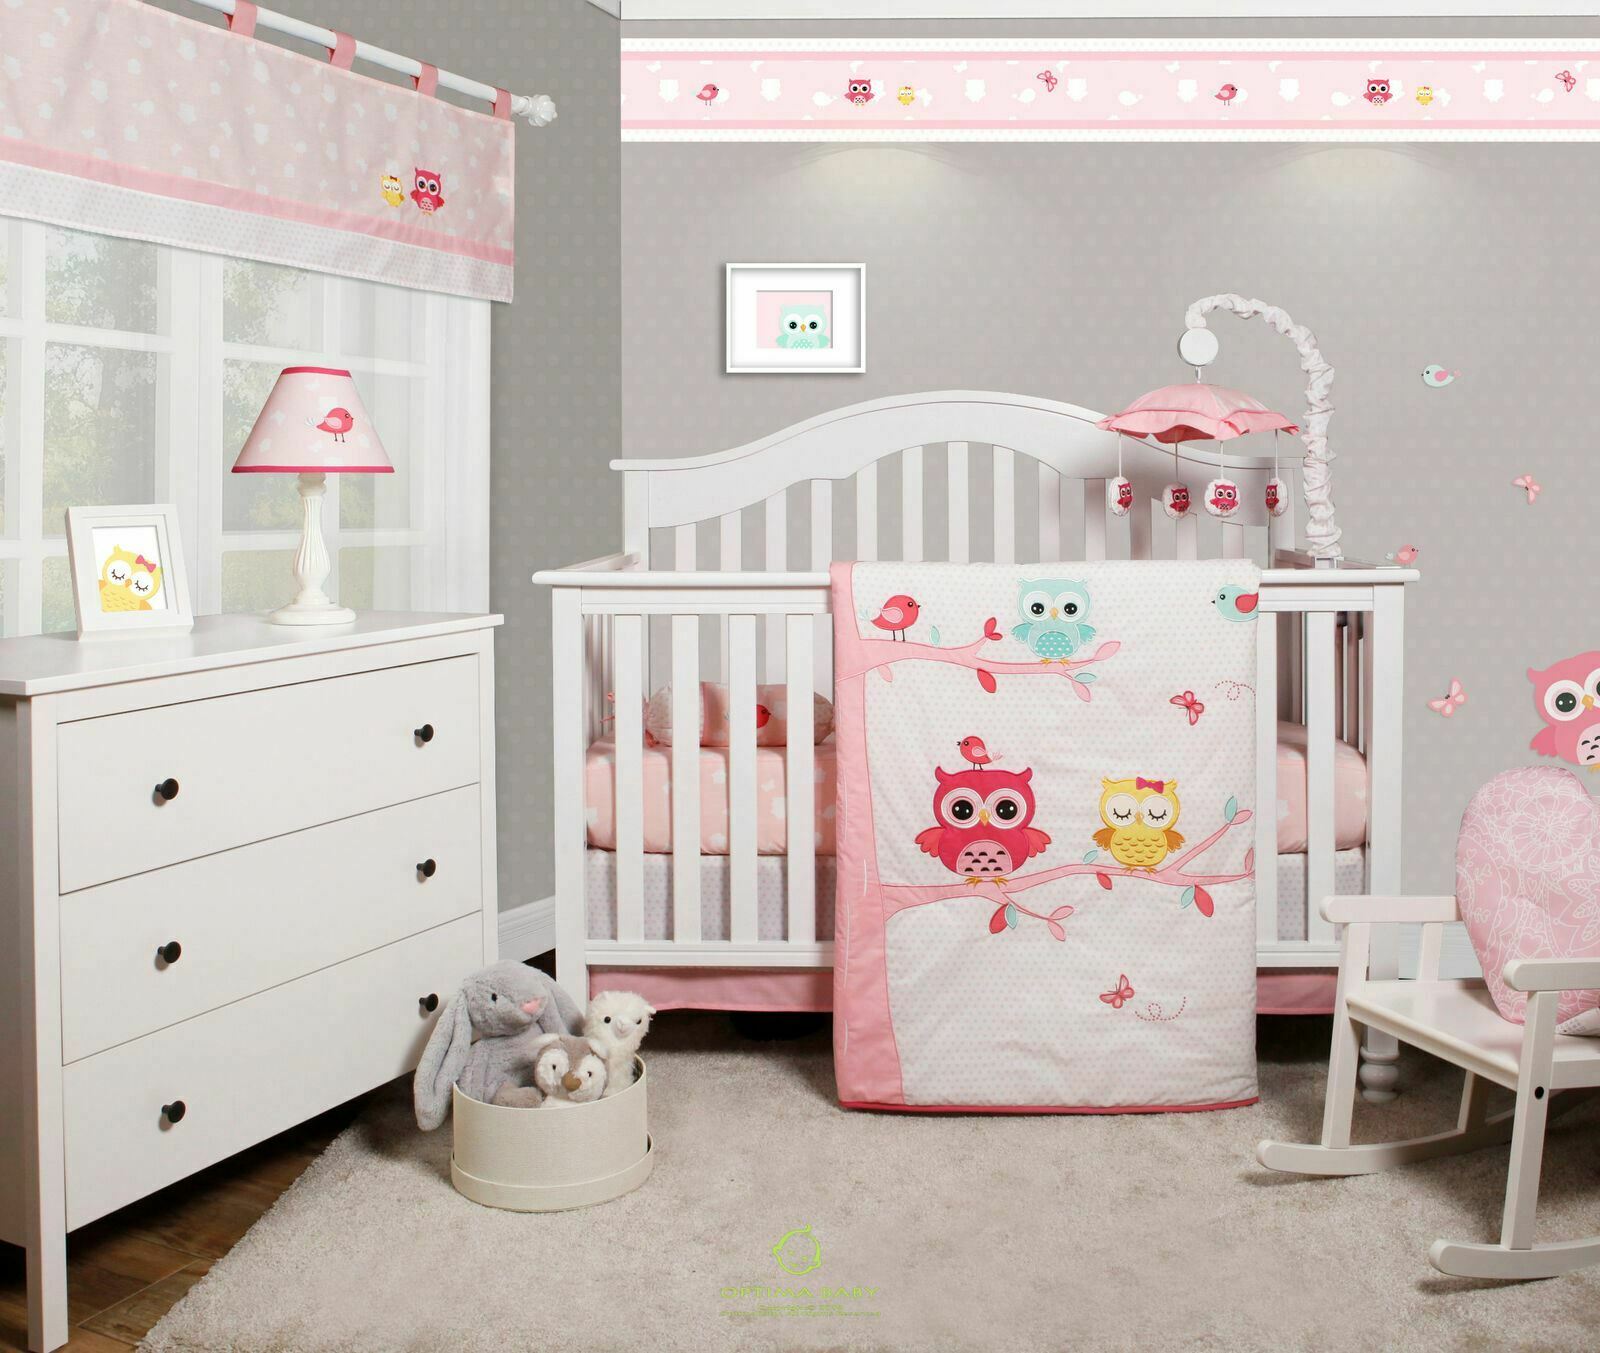 Optimababy 7pcs Enchanted Owls Family Baby Bedding Sets With Musical Mobile